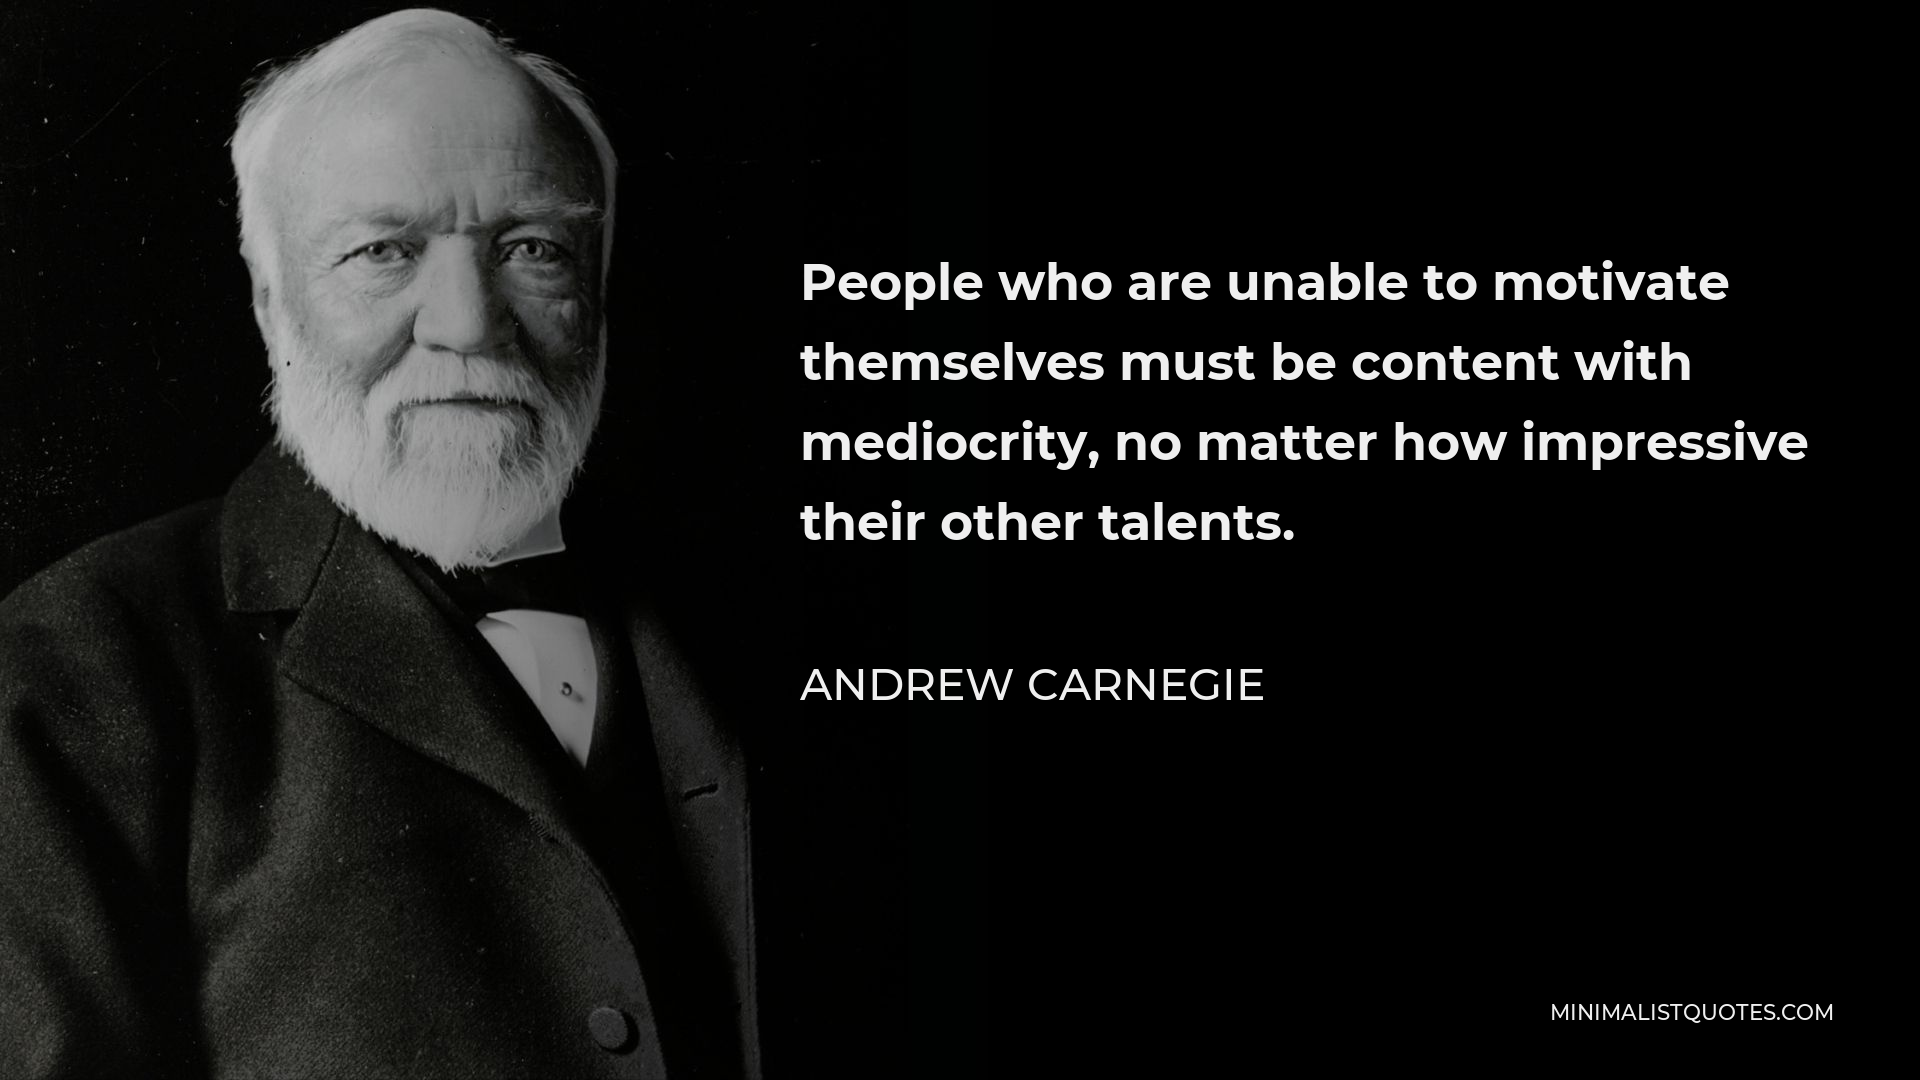 Andrew Carnegie Quote: People who are unable to motivate themselves ...